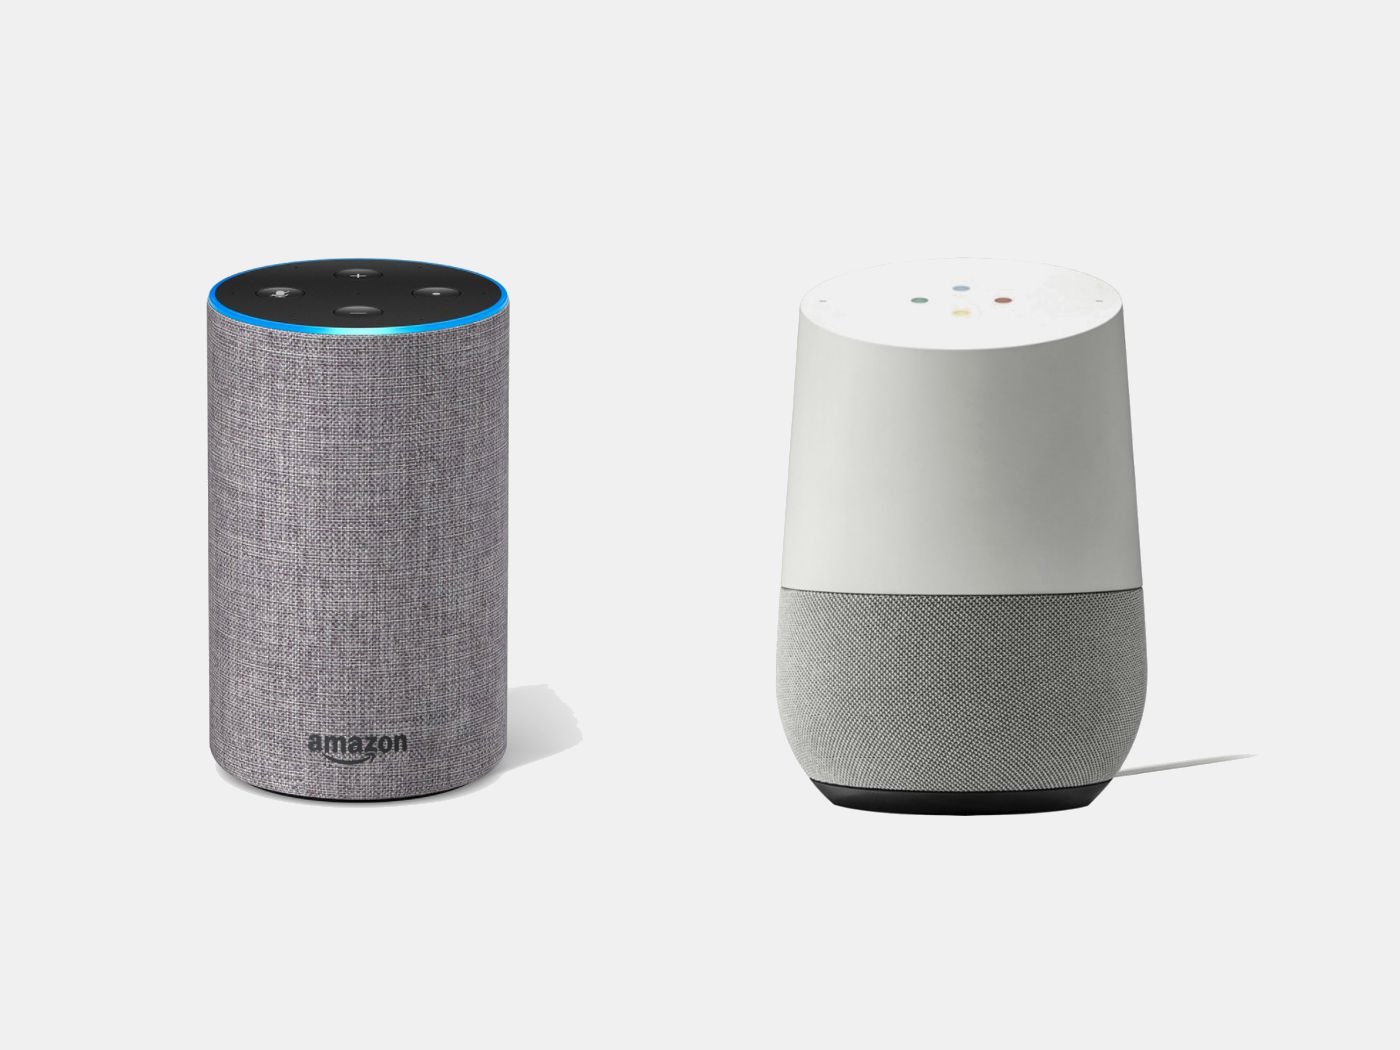 Google Home and Echo Together